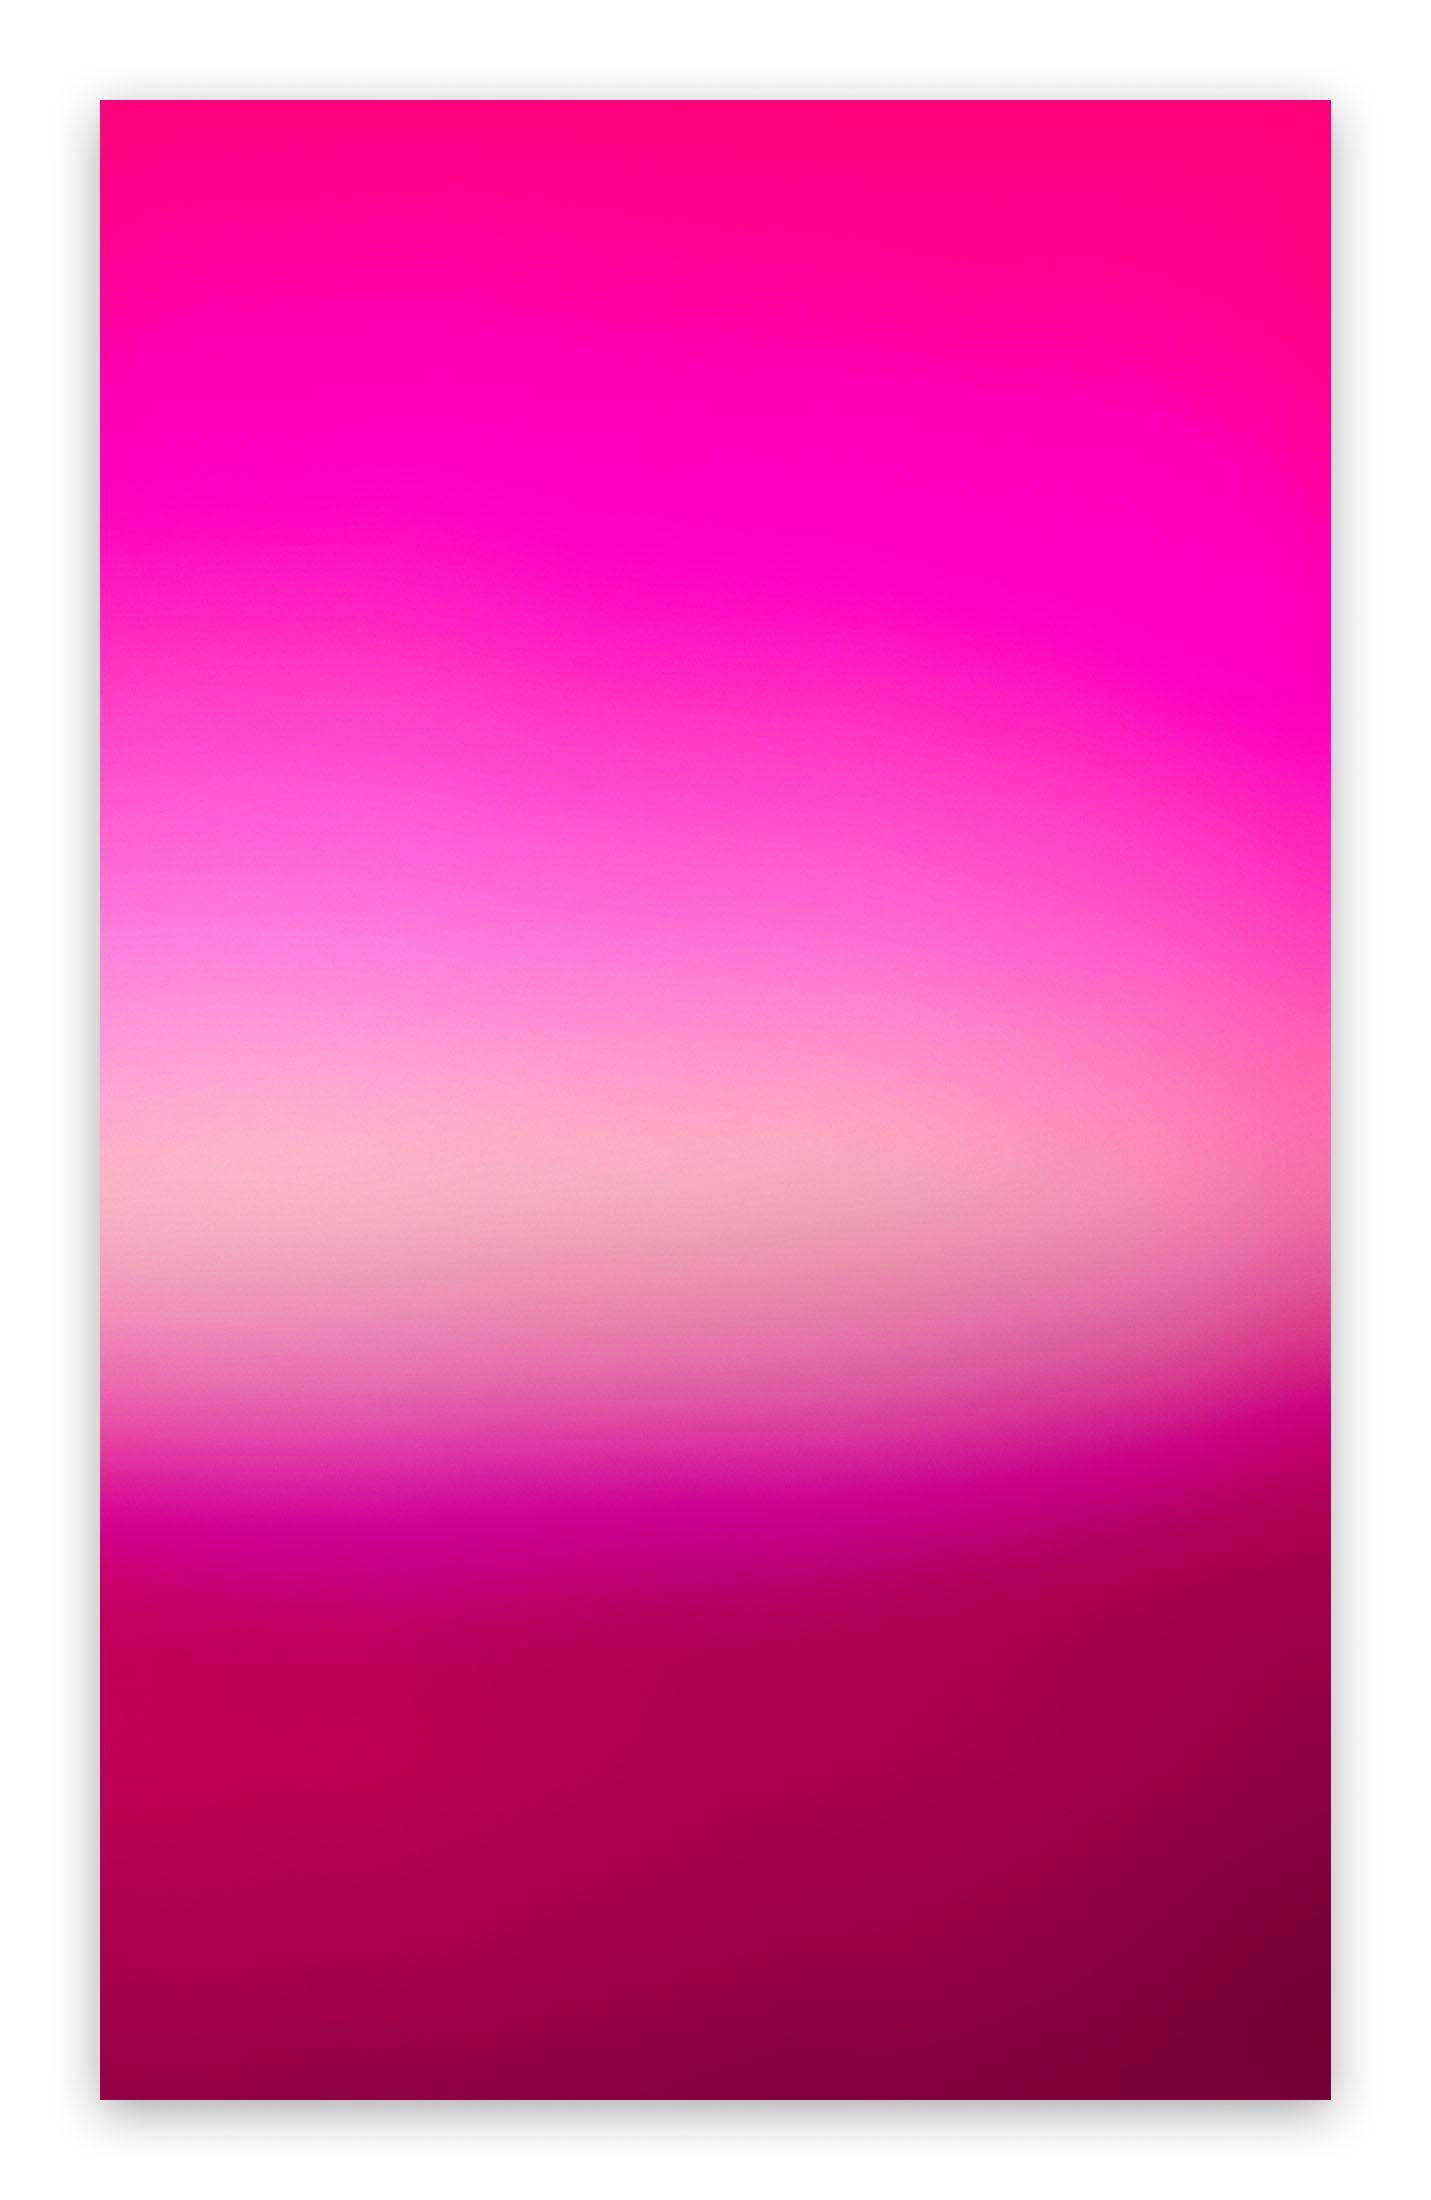 Anne Senstad Abstract Photograph – Cosmosis Collages 24A577C no 123 Pink (Abstrakte Fotografie)